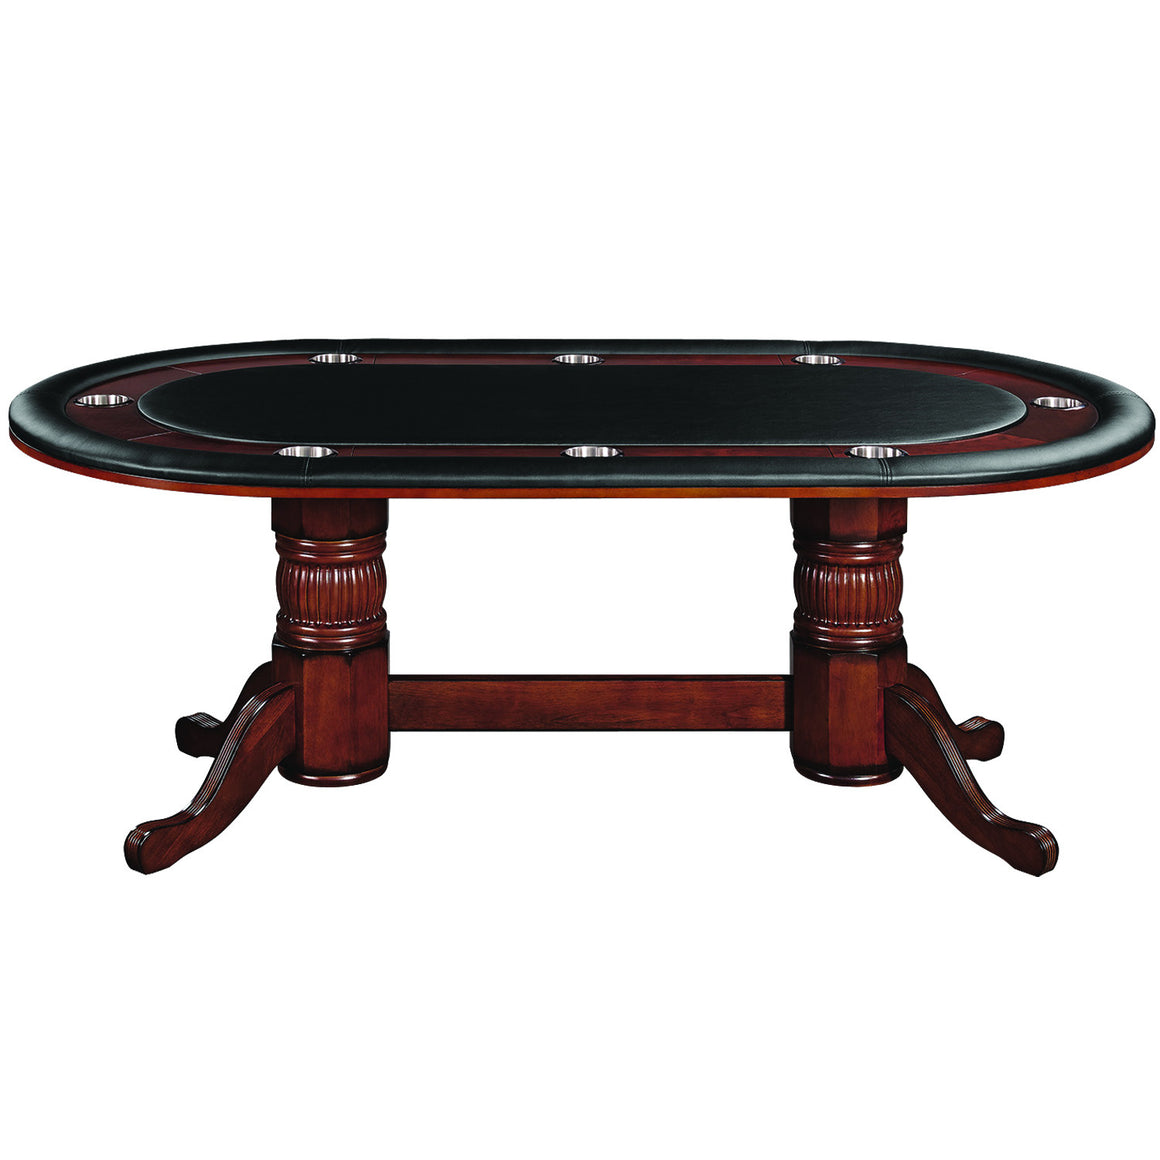 84" Texas Hold'em Poker and Game Table Dining Top - Chestnut Finish - Man Cave Boutique